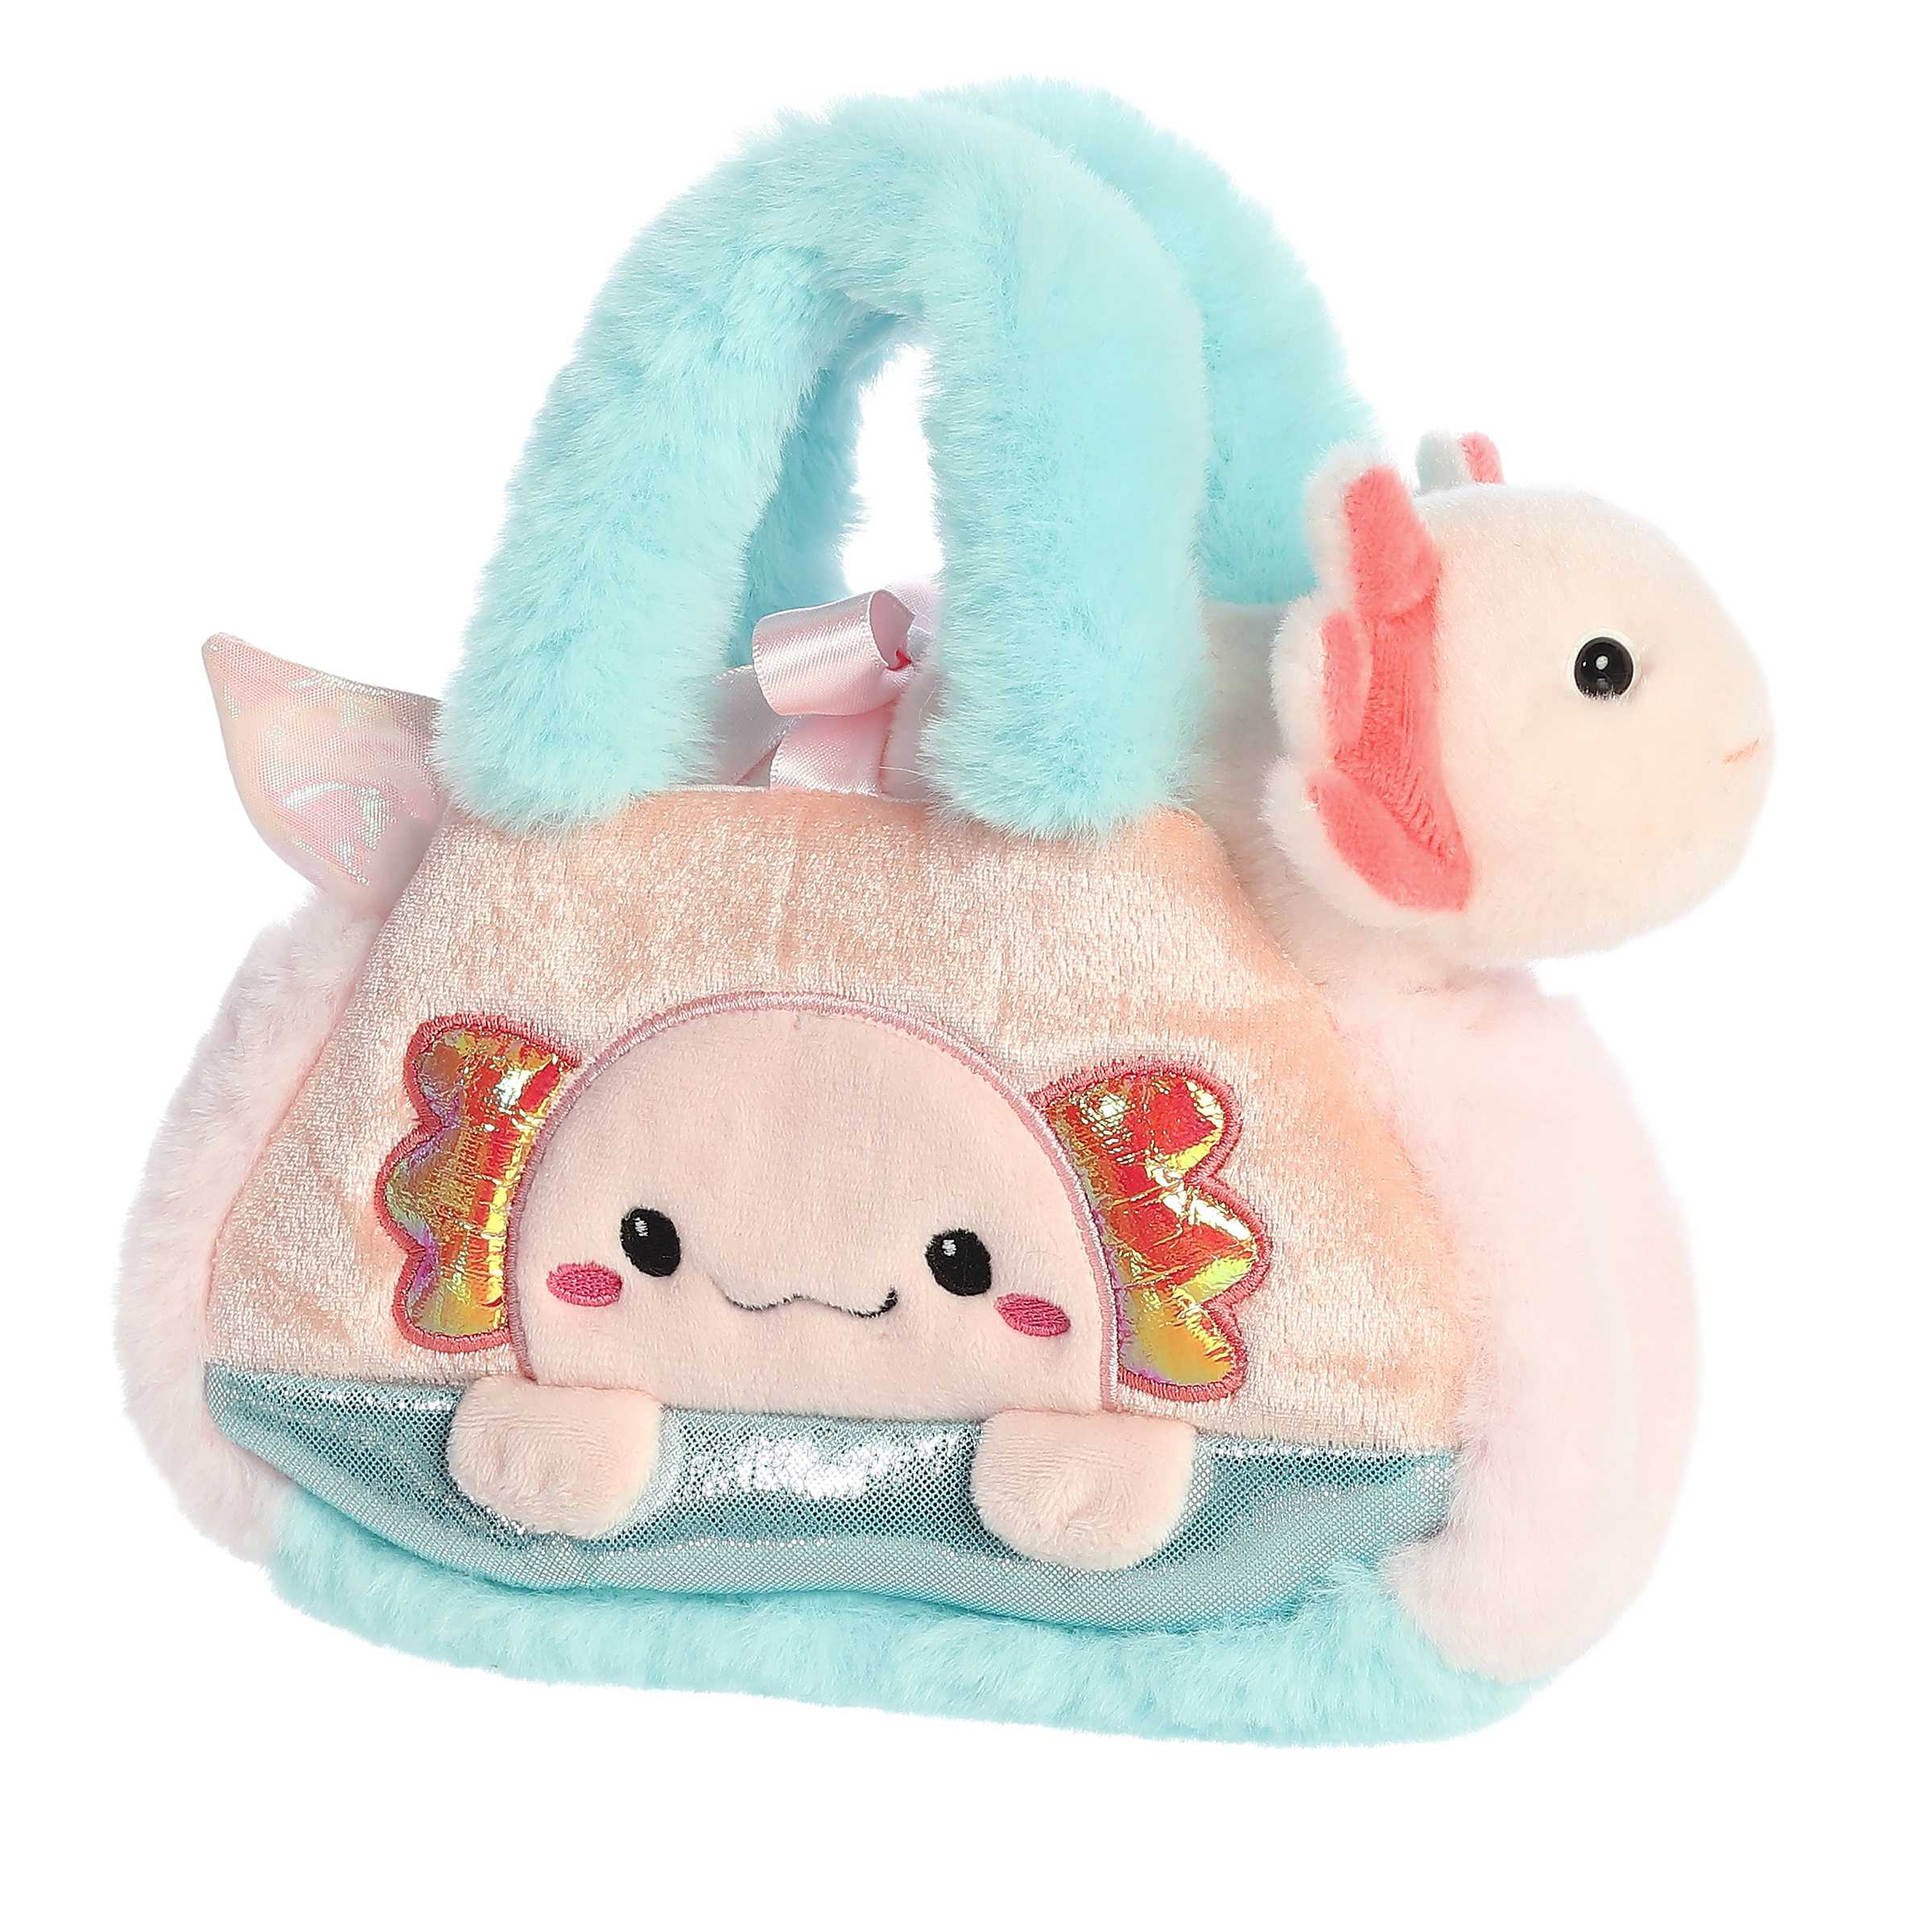 Charming pink Peek-A-Boo Axolotl plush in a pastel carrier, ideal for fun and as a delightful gift.